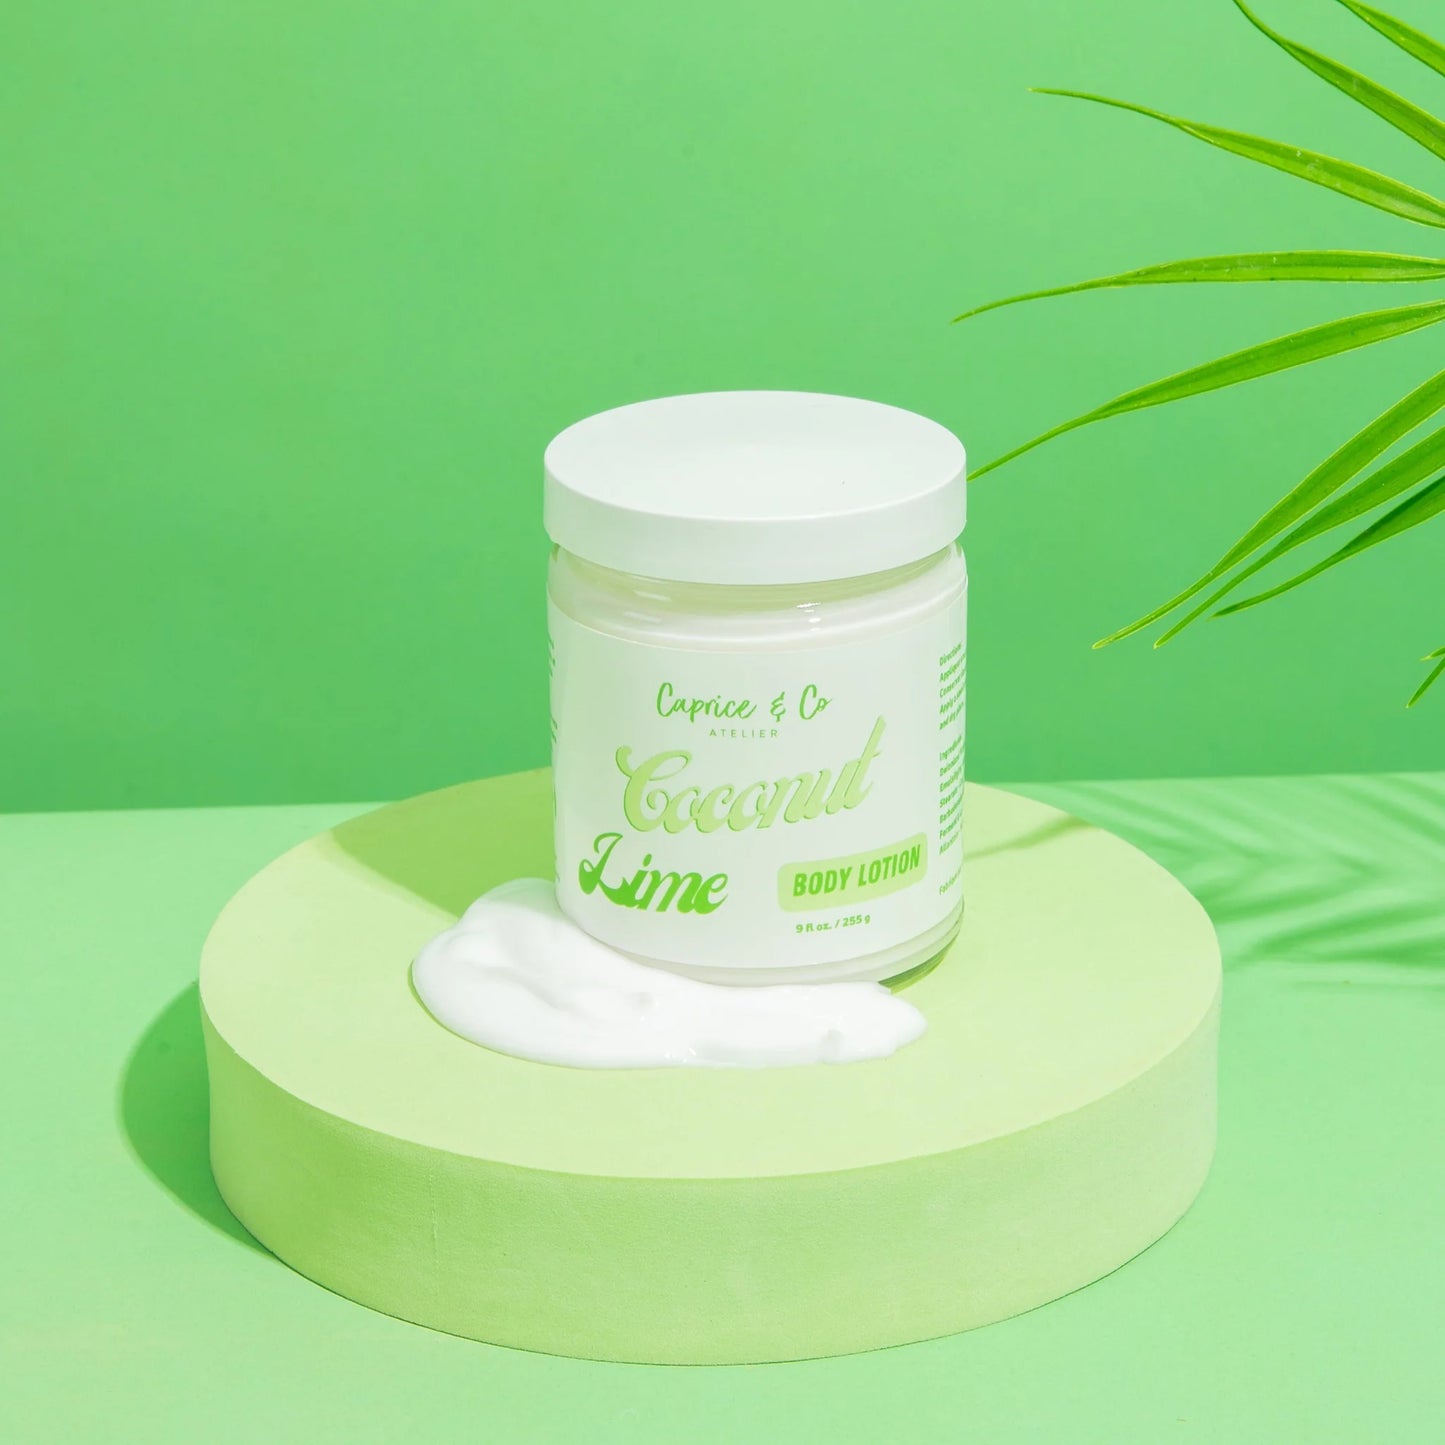 Coconut Lime - Body Lotion